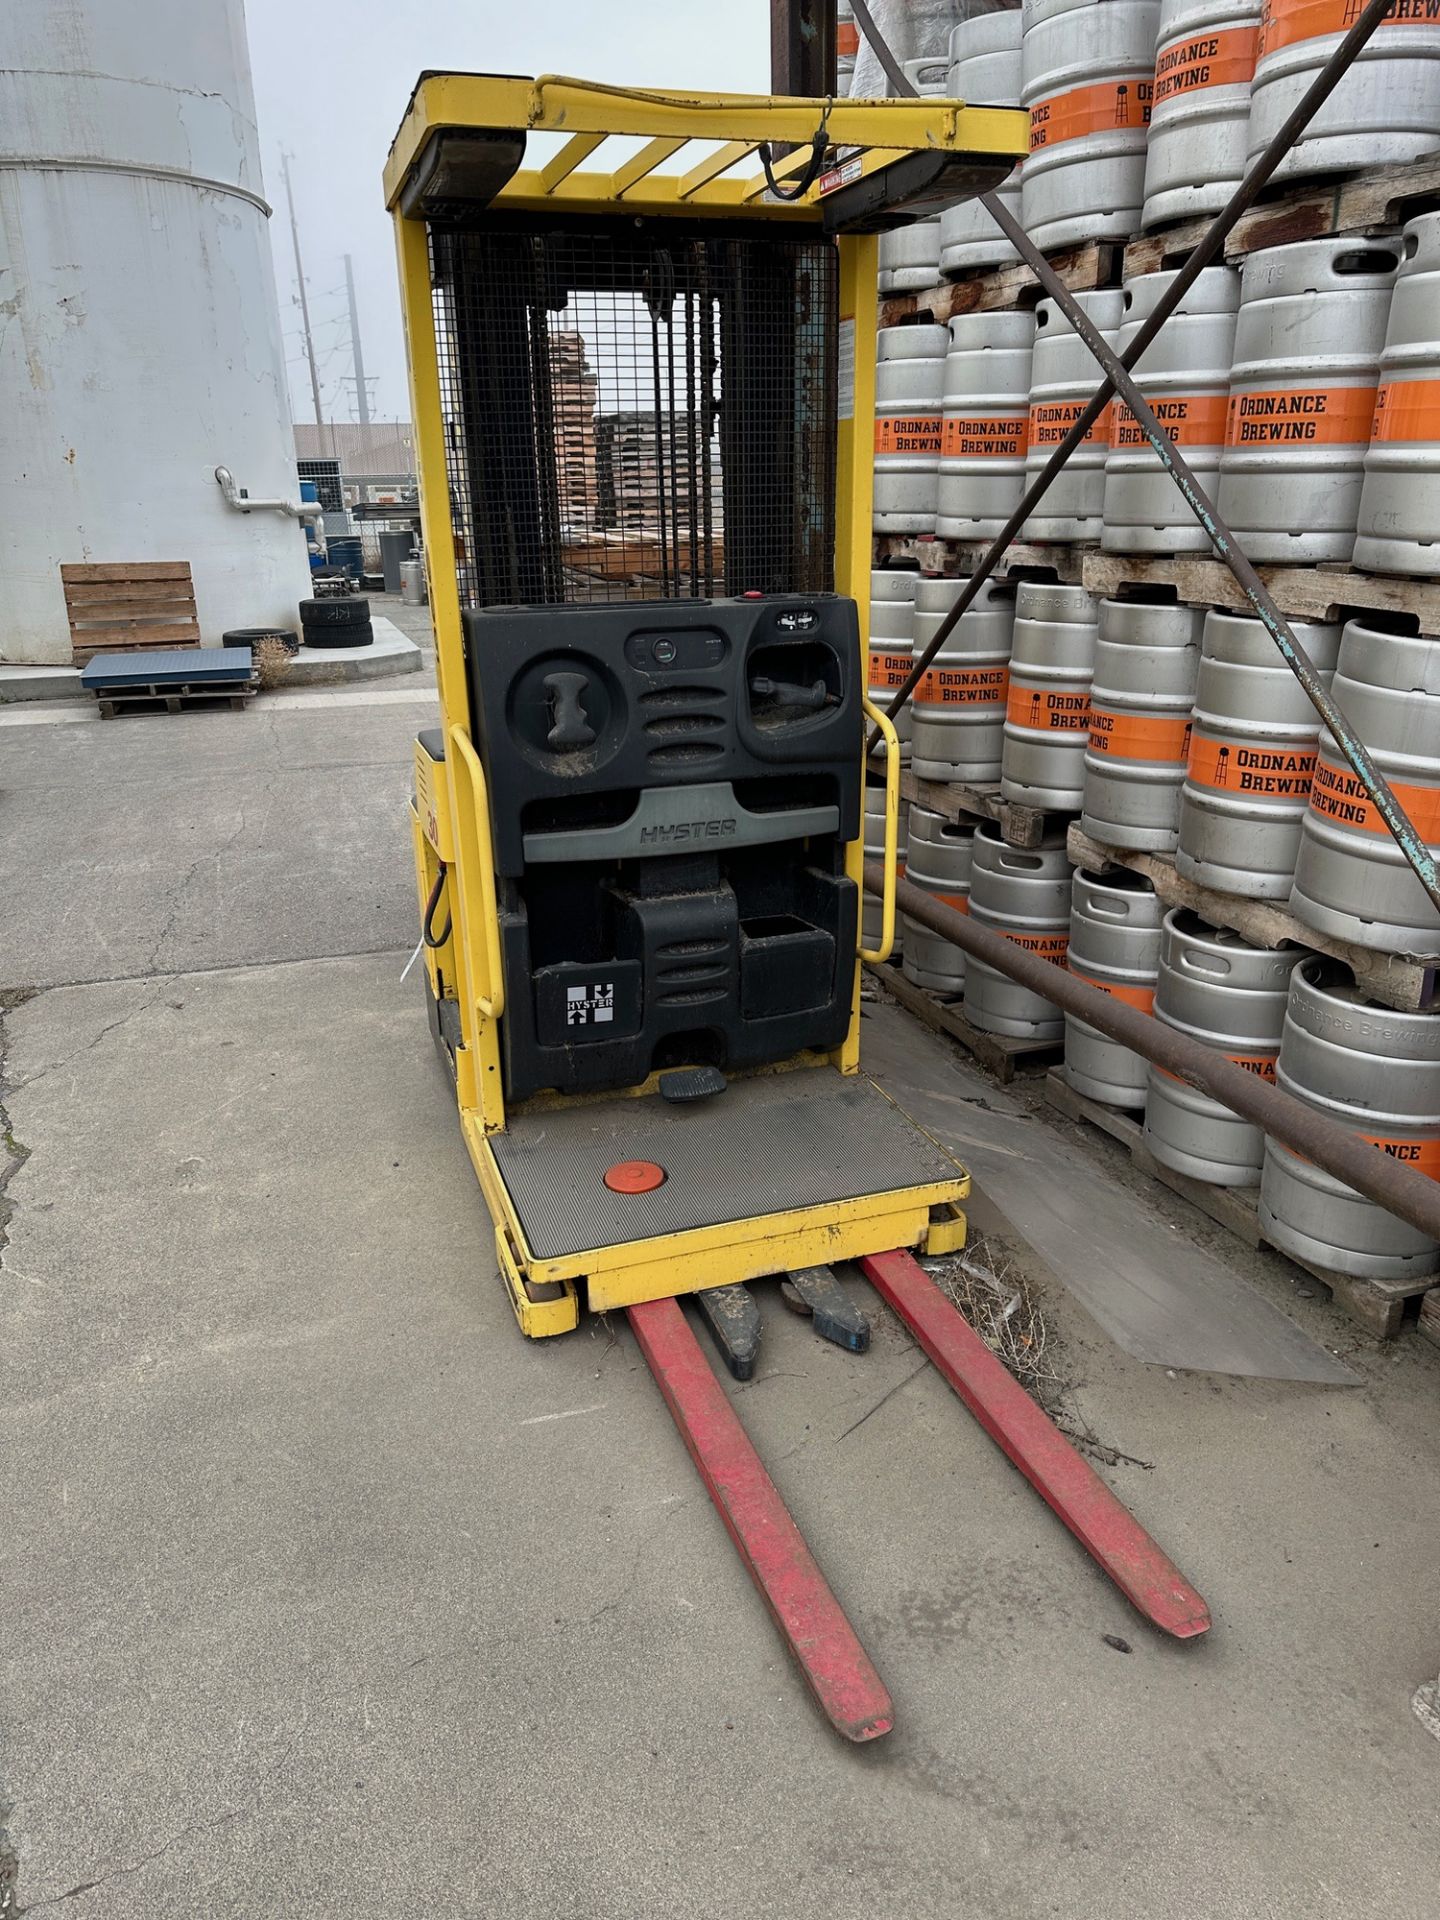 Hyster 24 Volt Electric Lift Truck Model R30XMS2 | Rig Fee $50 - Image 2 of 5